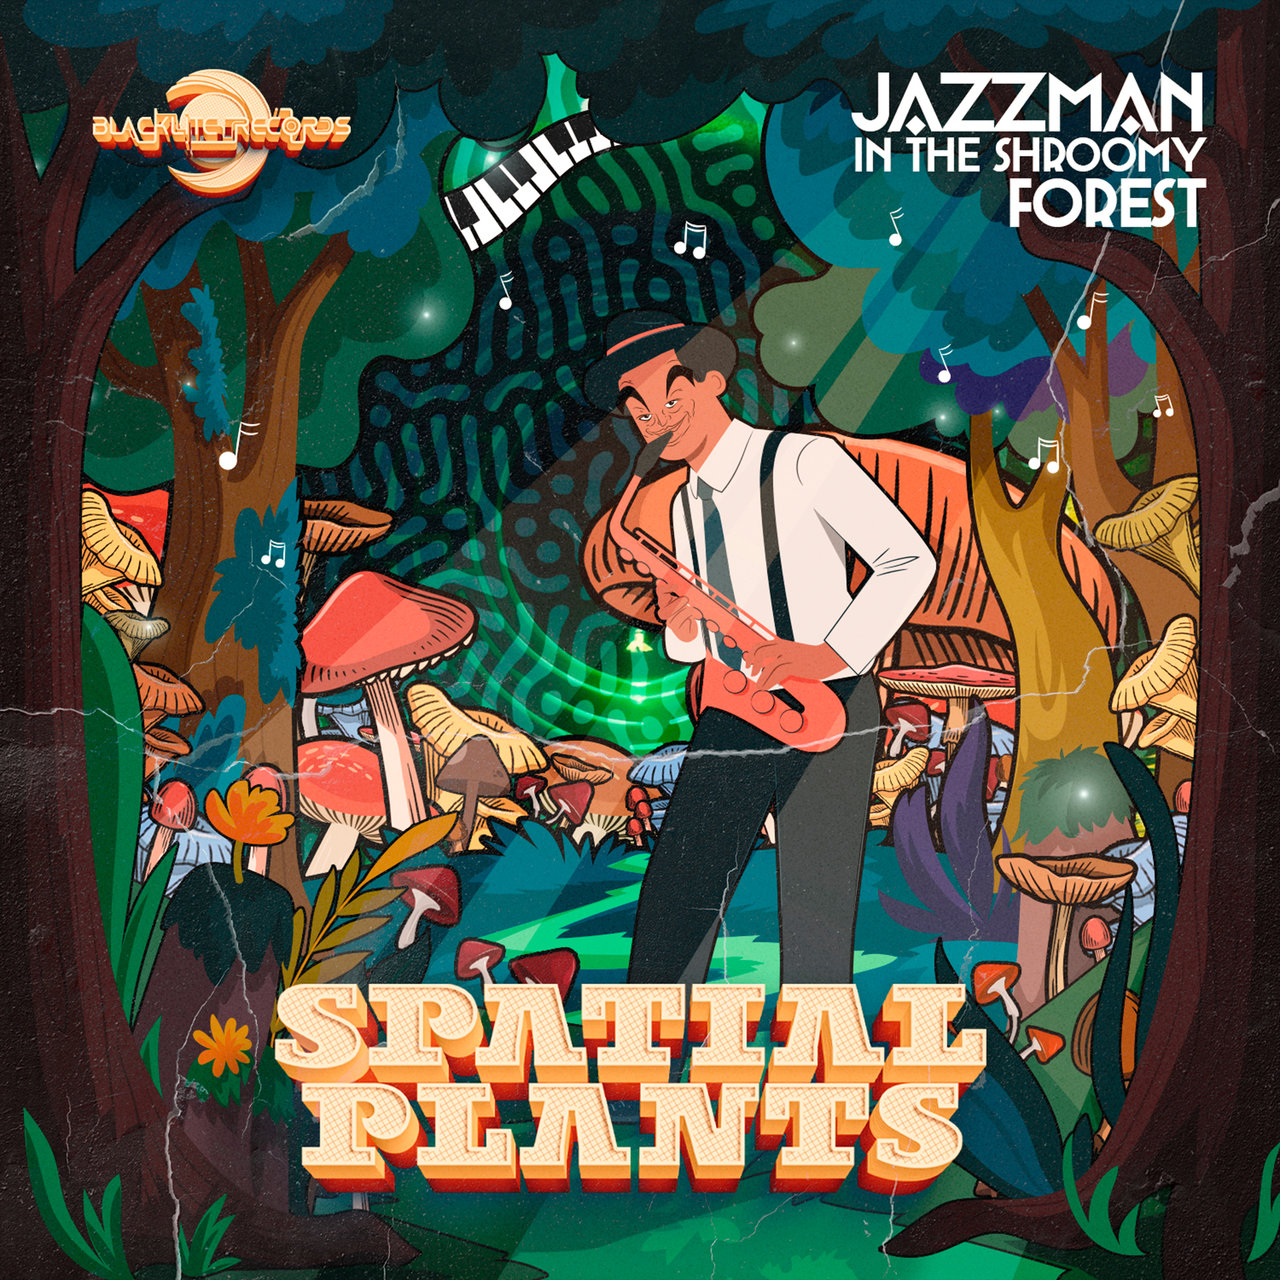 Jazzman in the Shroomy Forest